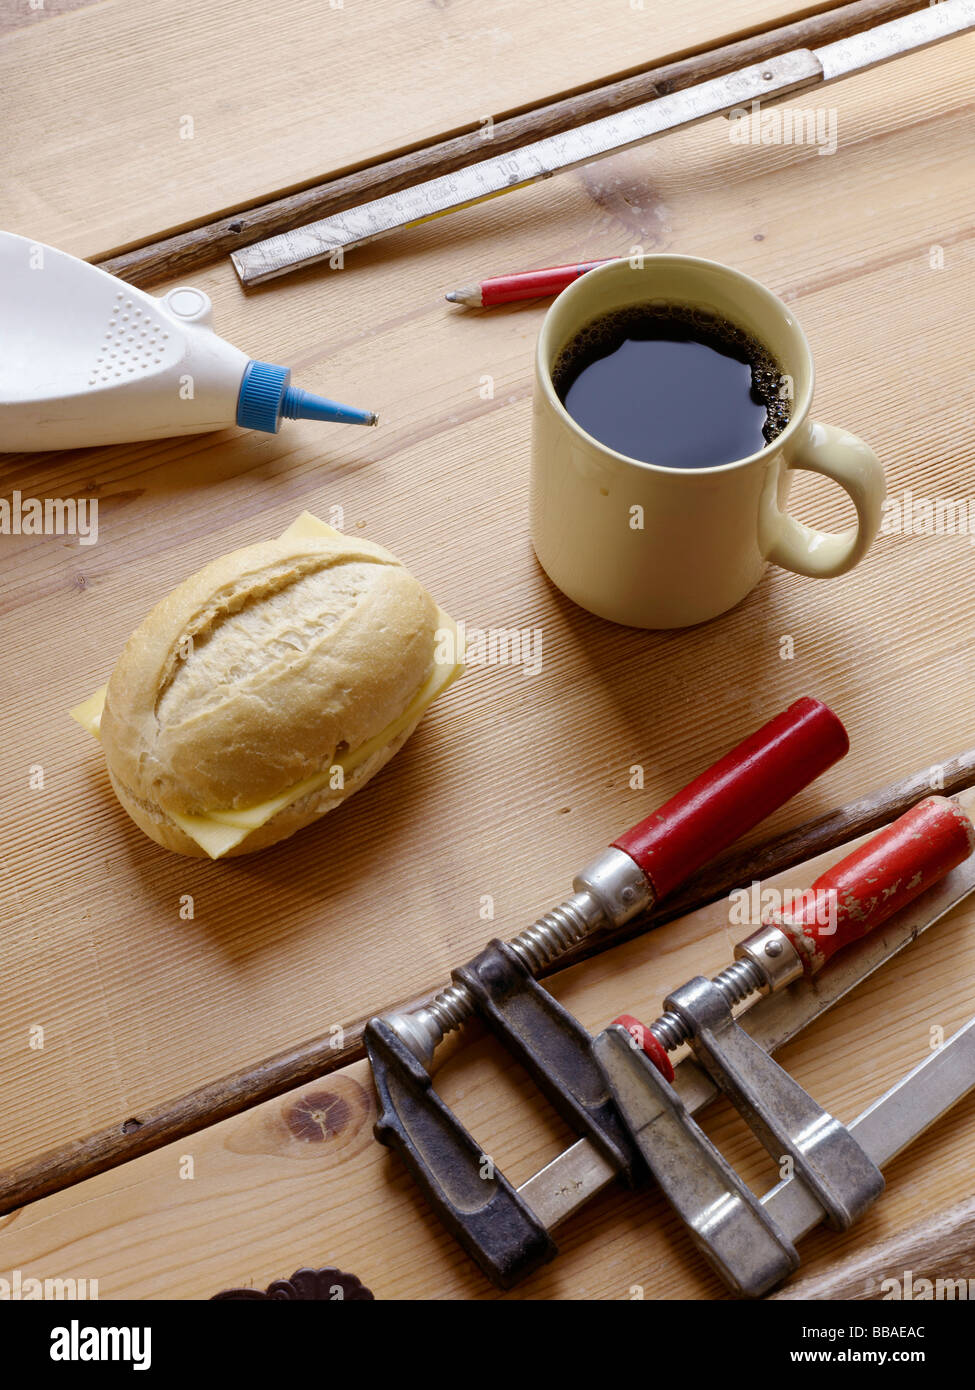 Objects on a counter in a wood workshop Stock Photo